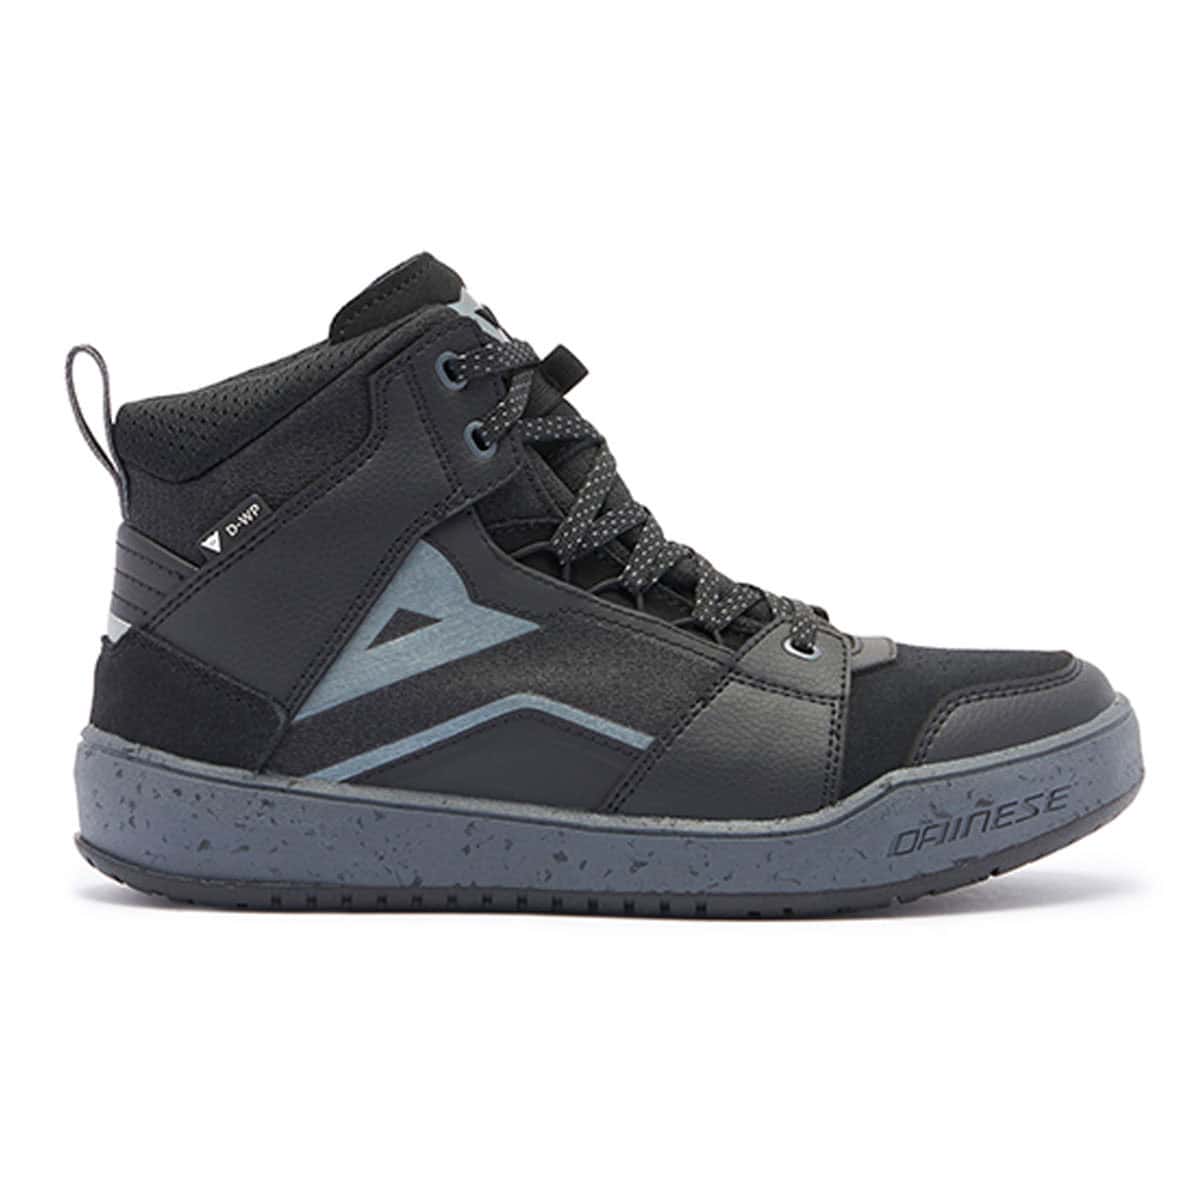 Ladies Dainese Suburb D-WP boots - Side